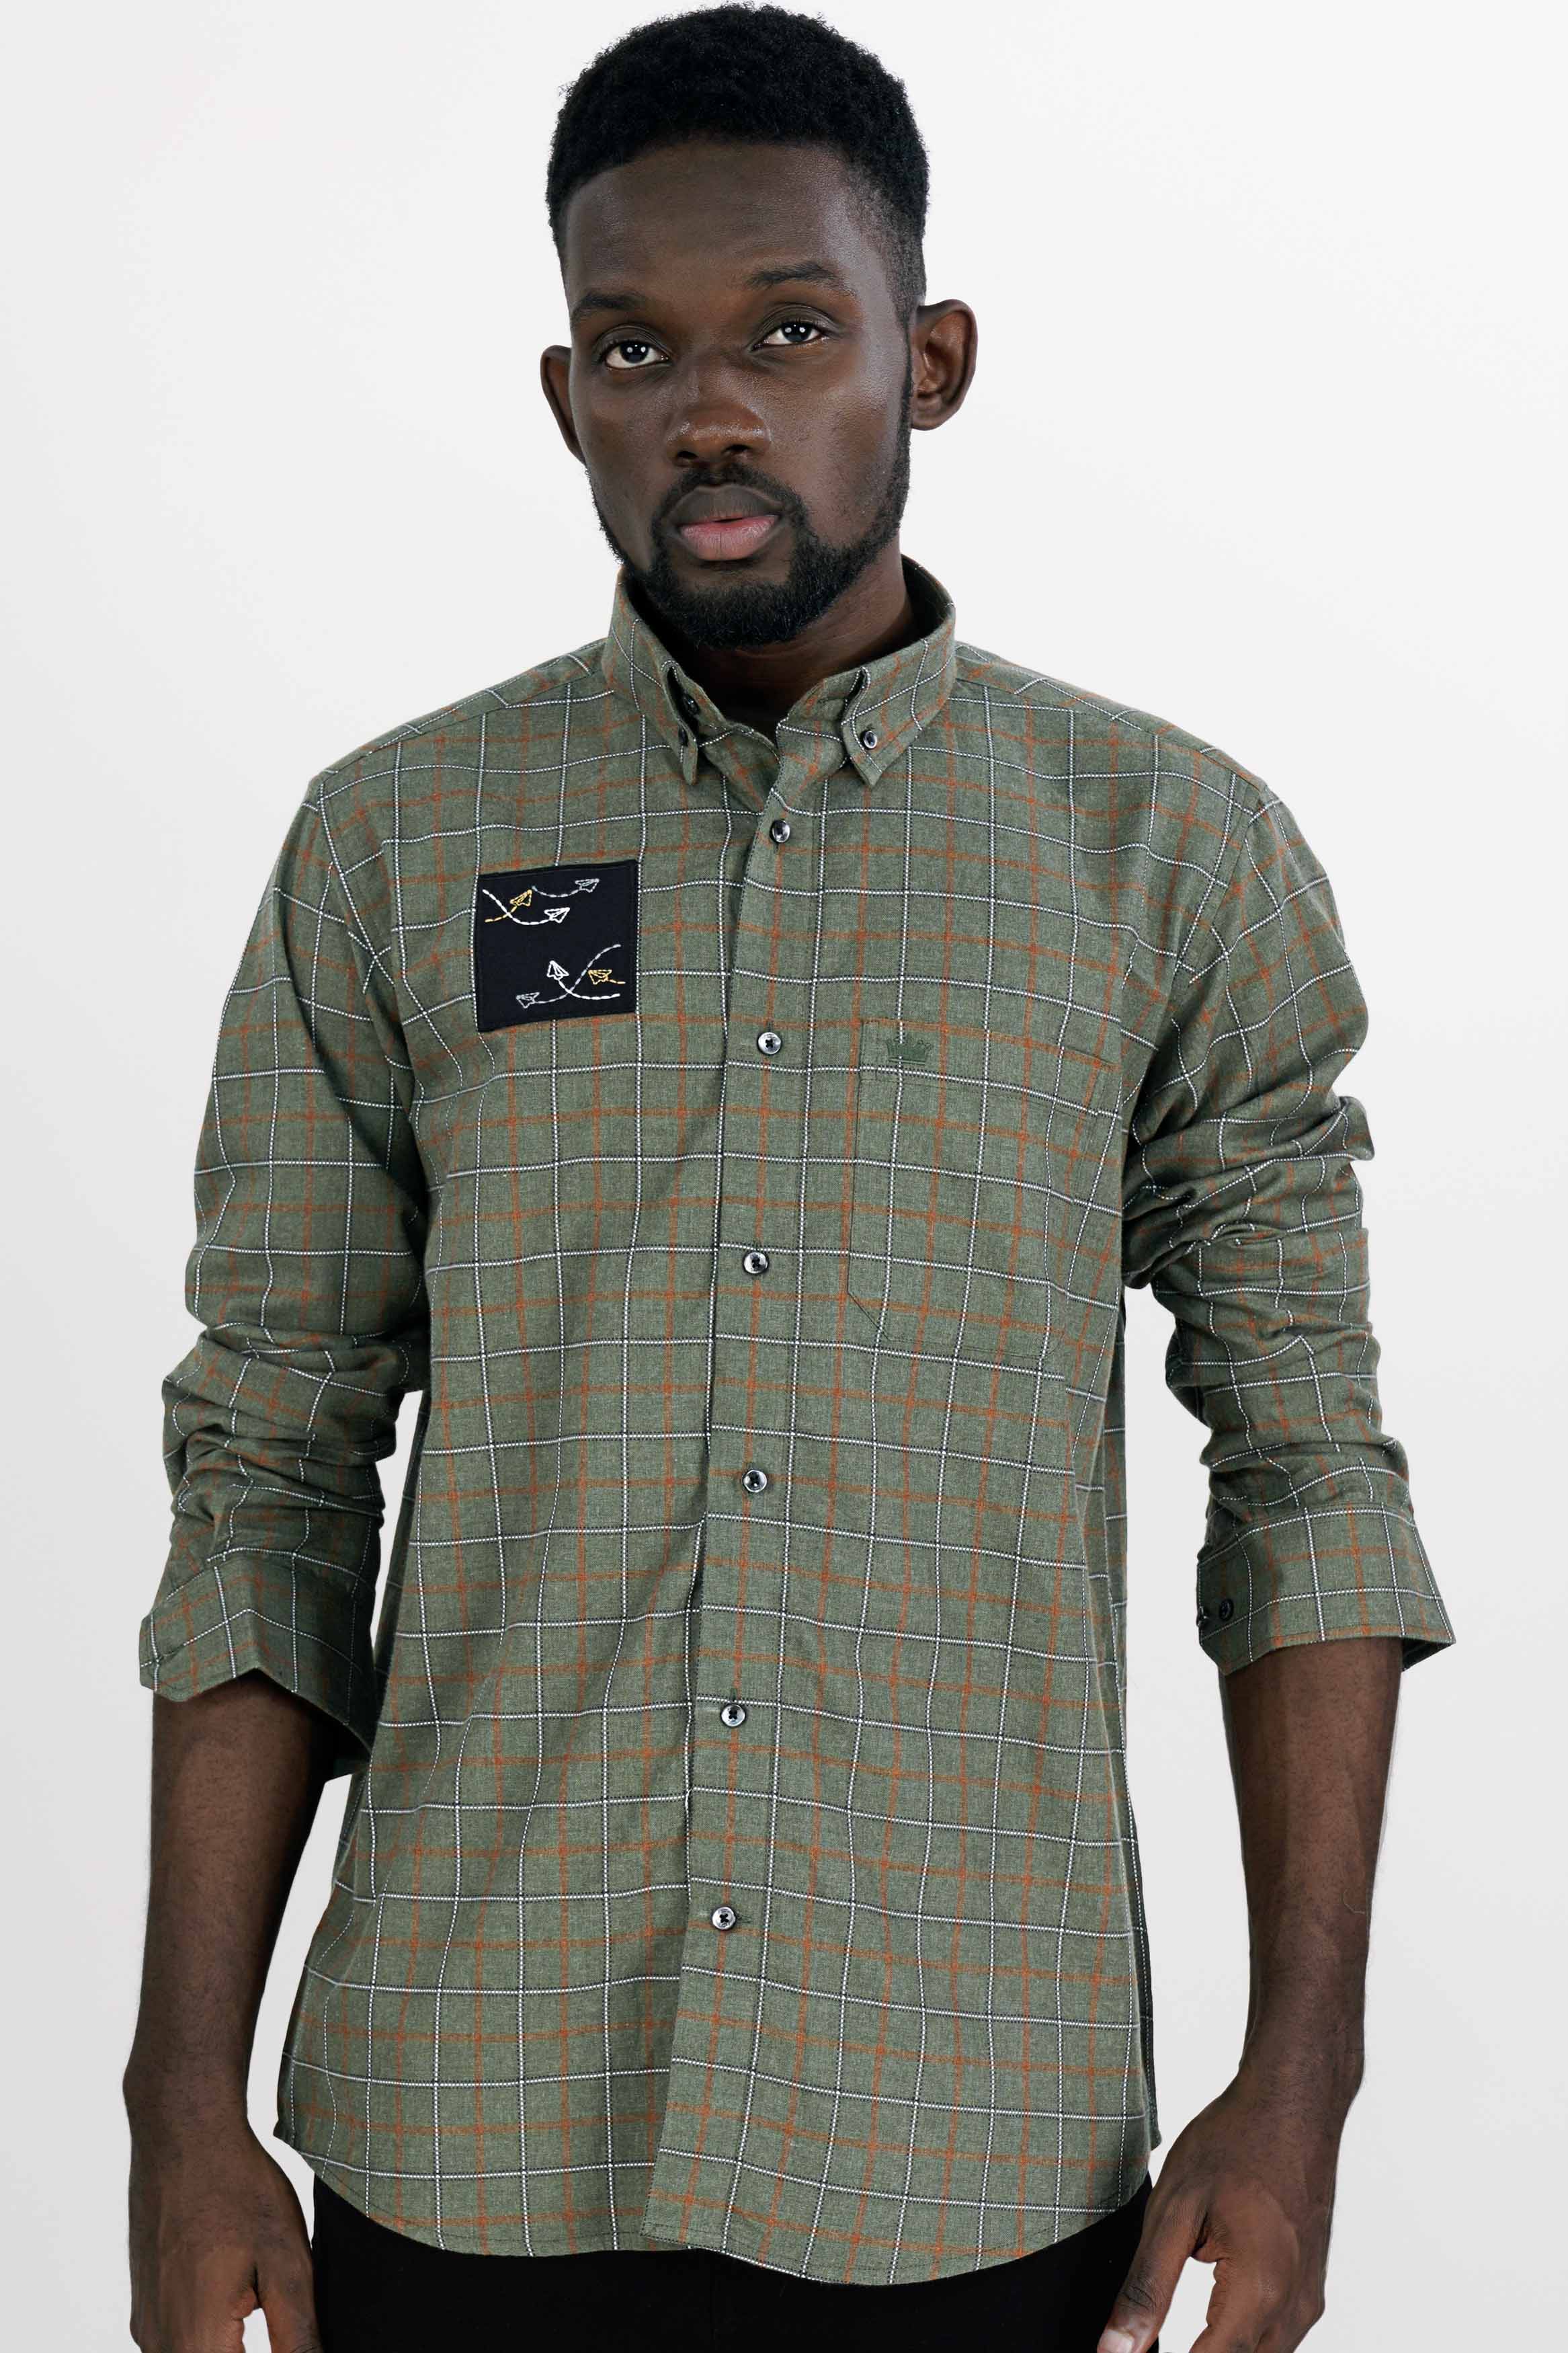 Stonewall Green and Brownish Checkered with Funky Patchwork Dobby Textured Premium Giza Cotton Designer Shirt 7840-BD-BLK-E164-38, 7840-BD-BLK-E164-H-38, 7840-BD-BLK-E164-39, 7840-BD-BLK-E164-H-39, 7840-BD-BLK-E164-40, 7840-BD-BLK-E164-H-40, 7840-BD-BLK-E164-42, 7840-BD-BLK-E164-H-42, 7840-BD-BLK-E164-44, 7840-BD-BLK-E164-H-44, 7840-BD-BLK-E164-46, 7840-BD-BLK-E164-H-46, 7840-BD-BLK-E164-48, 7840-BD-BLK-E164-H-48, 7840-BD-BLK-E164-50, 7840-BD-BLK-E164-H-50, 7840-BD-BLK-E164-52, 7840-BD-BLK-E164-H-52